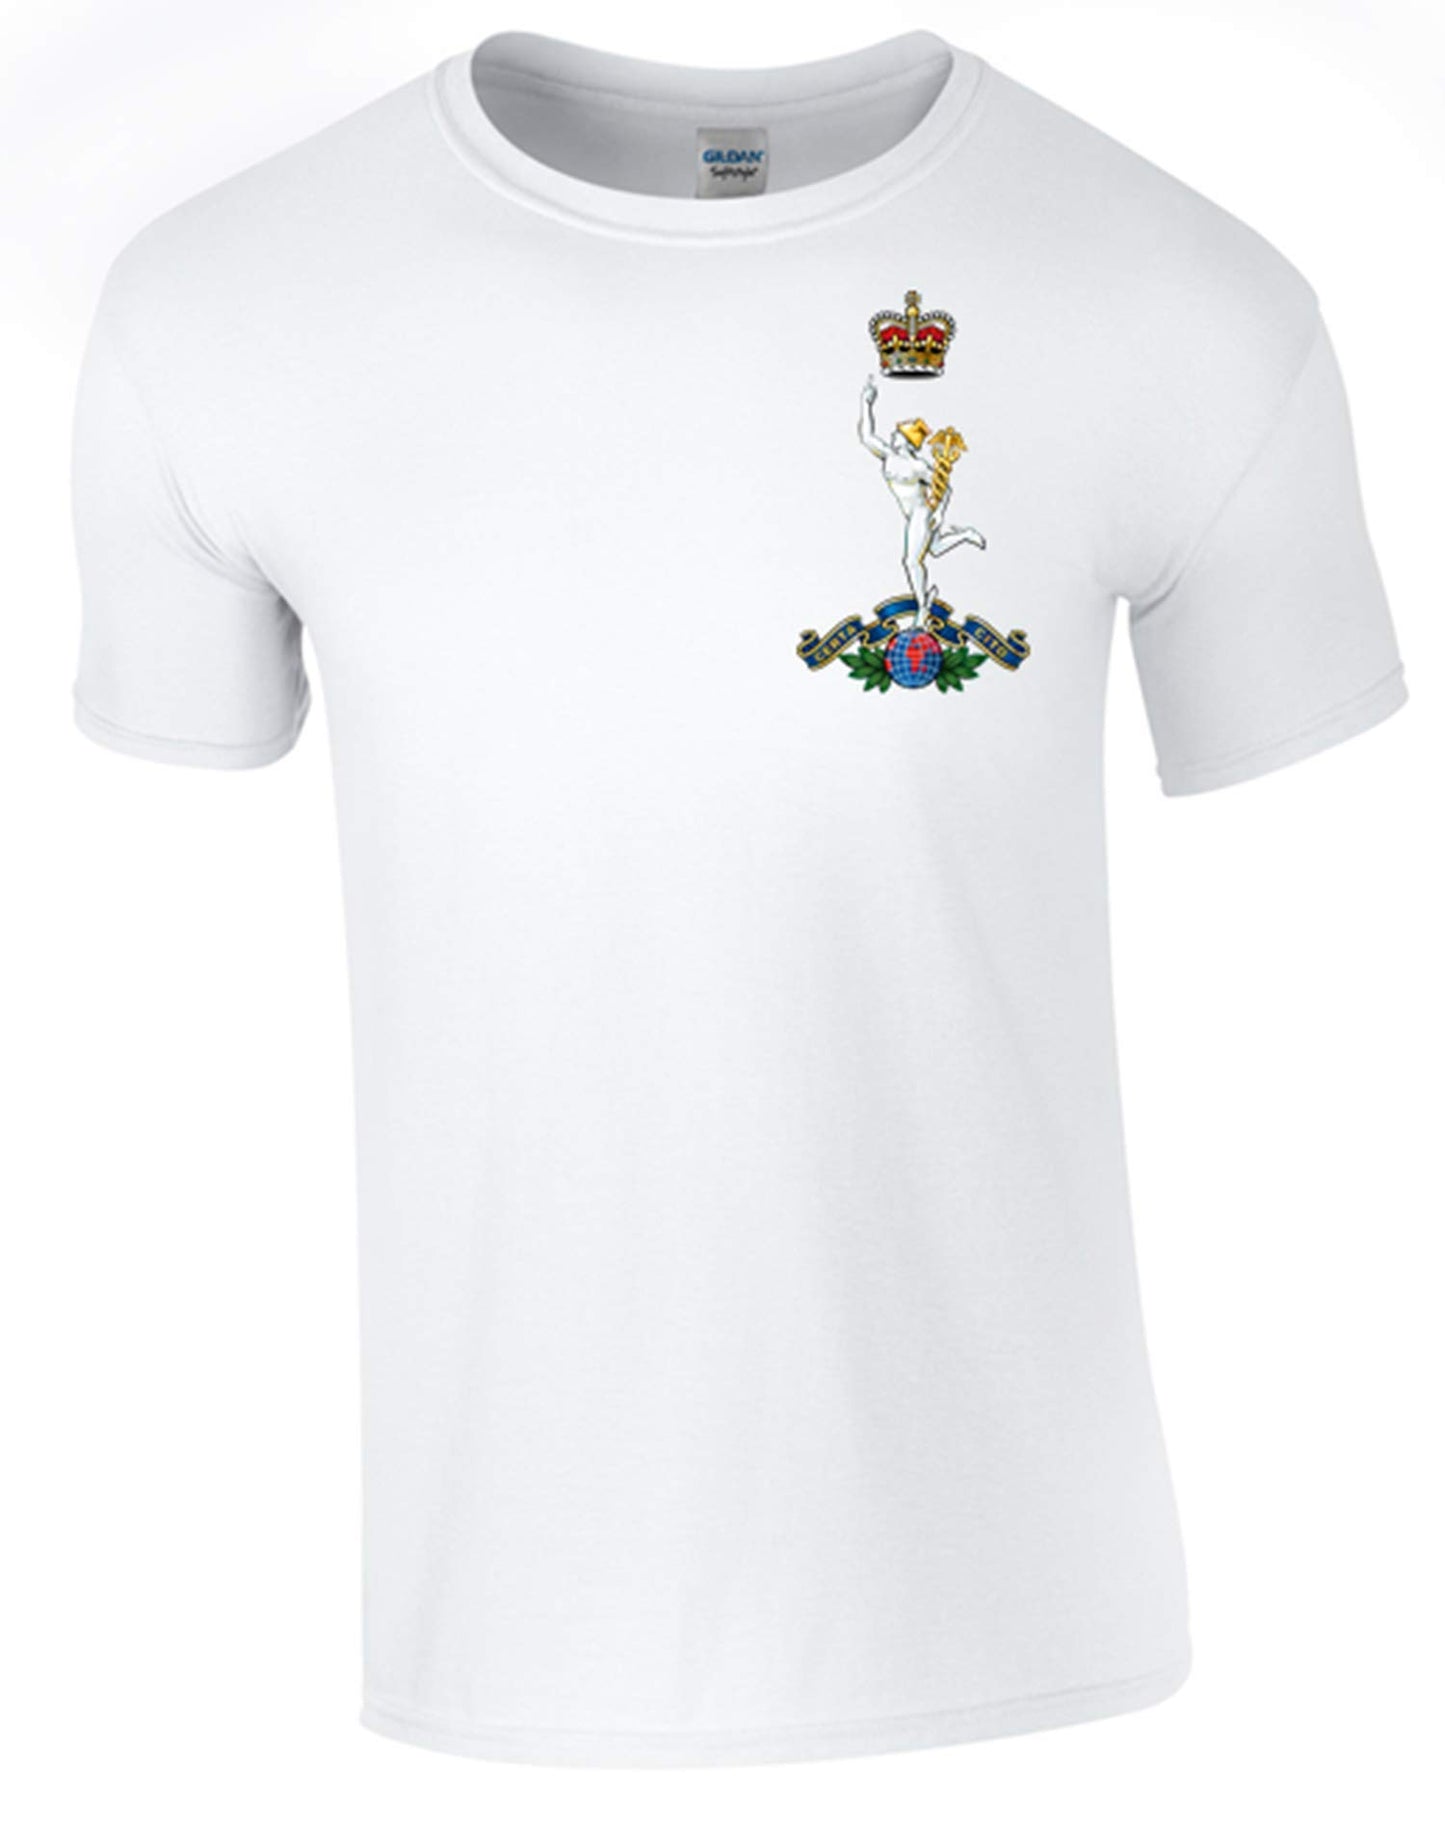 Royal Signals T-Shirt Official MOD Approved Merchandise - Army 1157 kit White / L Army 1157 Kit